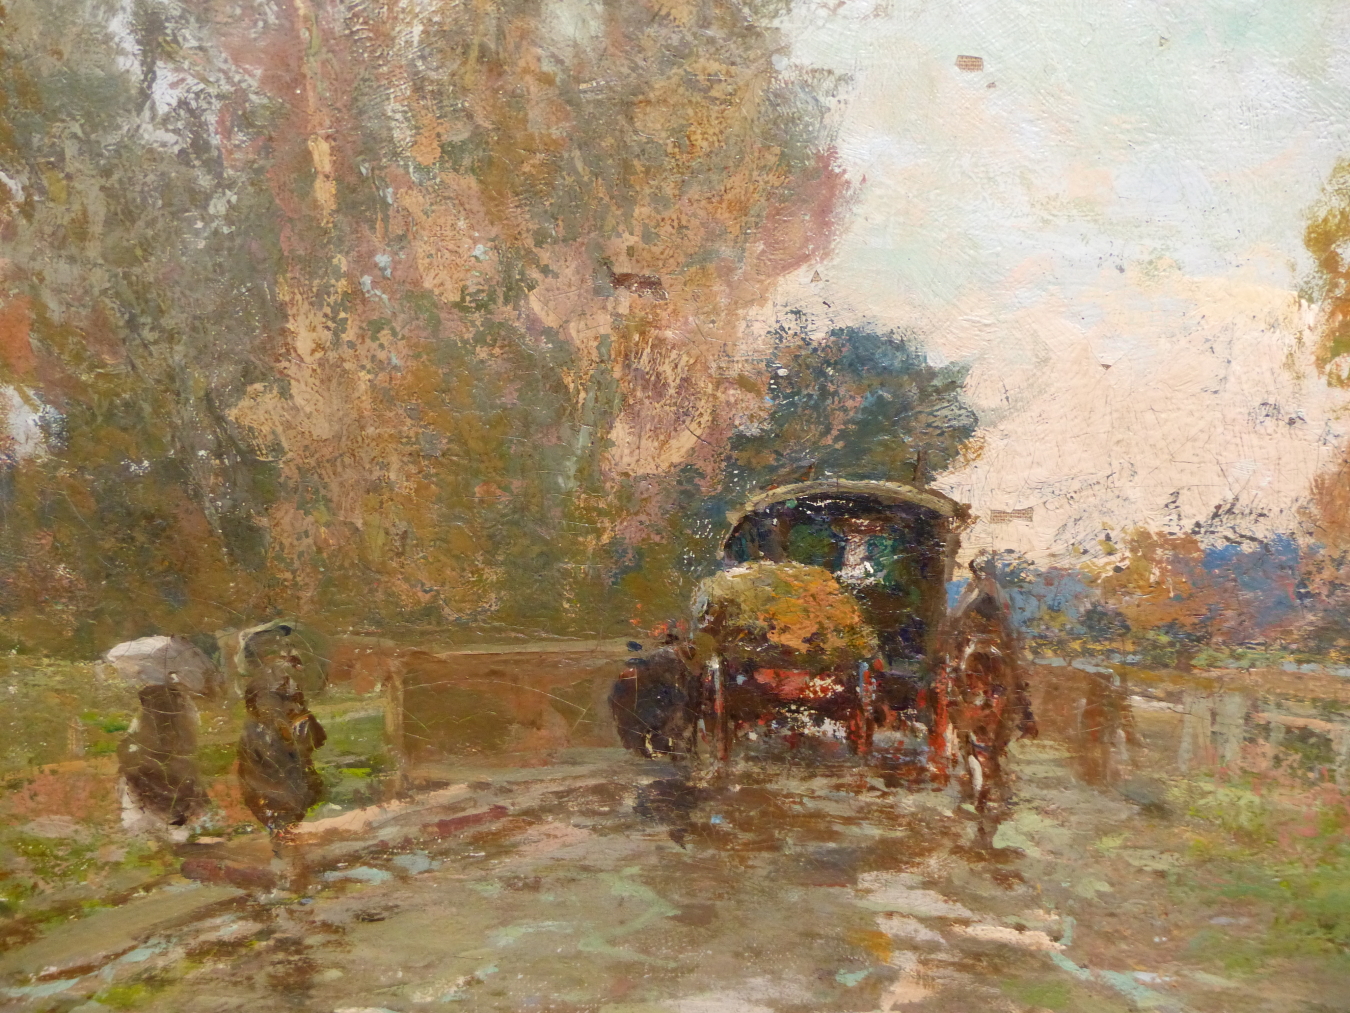 IMPRESSIONIST SCHOOL (LATE 19TH CENTURY), HORSE DRAWN CARRIAGE AND FIGURES ON A TREE LINED ROAD, - Image 4 of 7